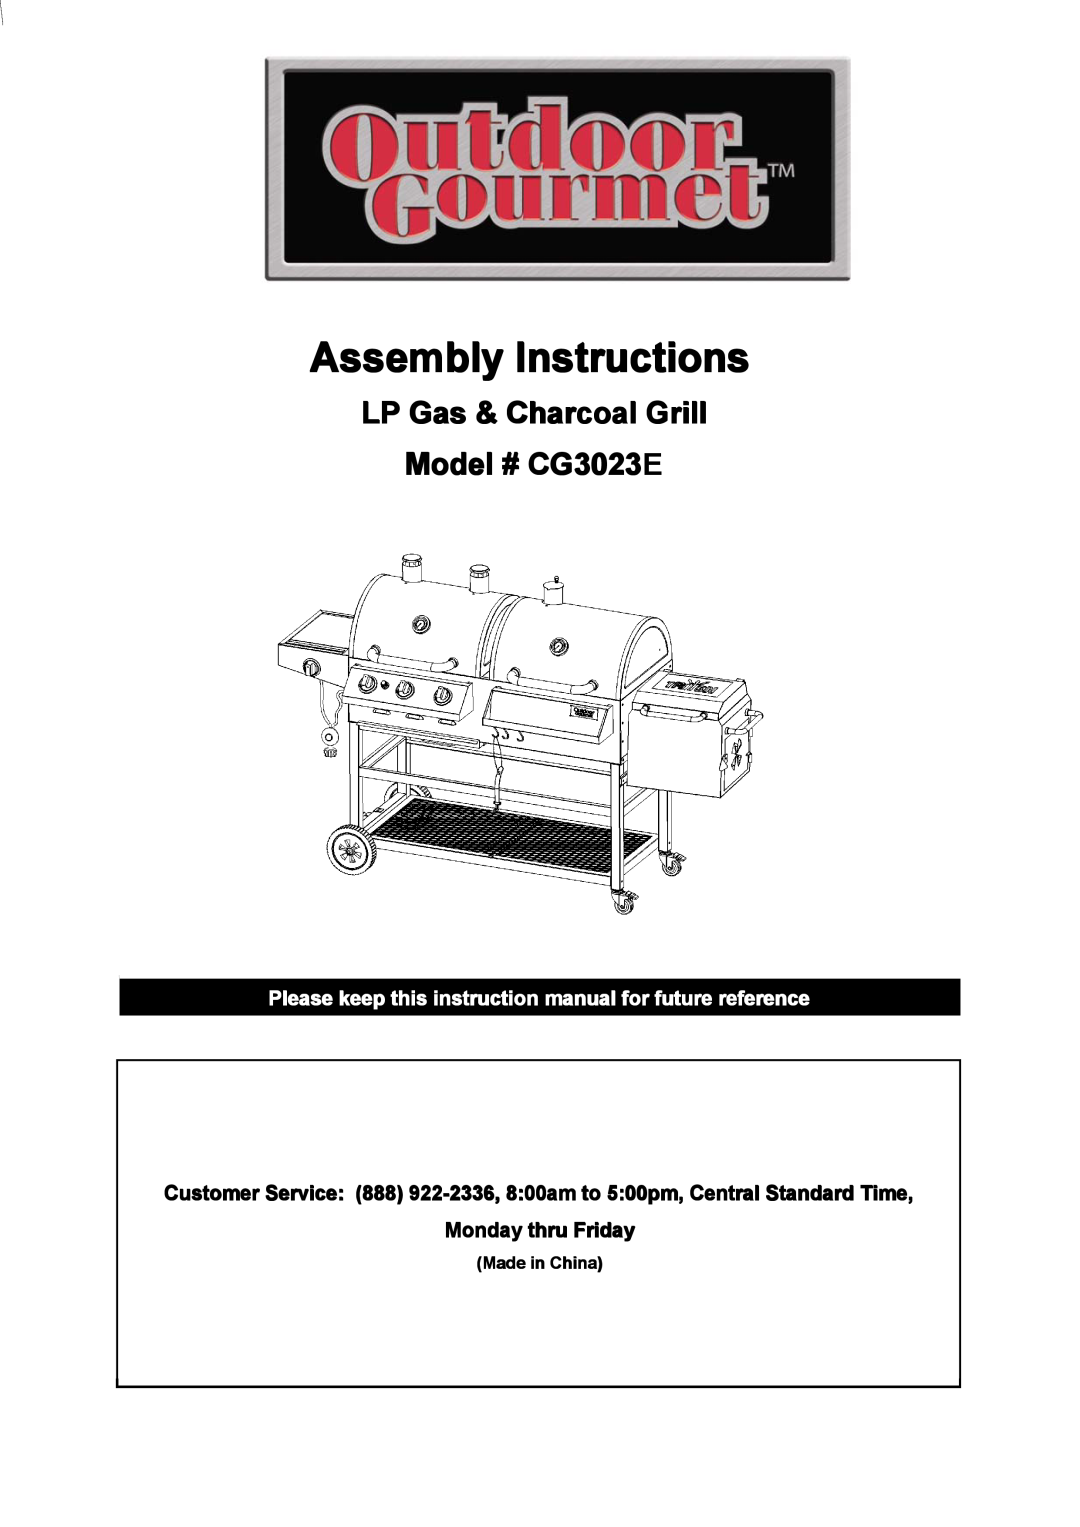 Outdoor Gourmet instruction manual Assembly Instructions, LP Gas & Charcoal Grill Model # CG3023E, Made in China 